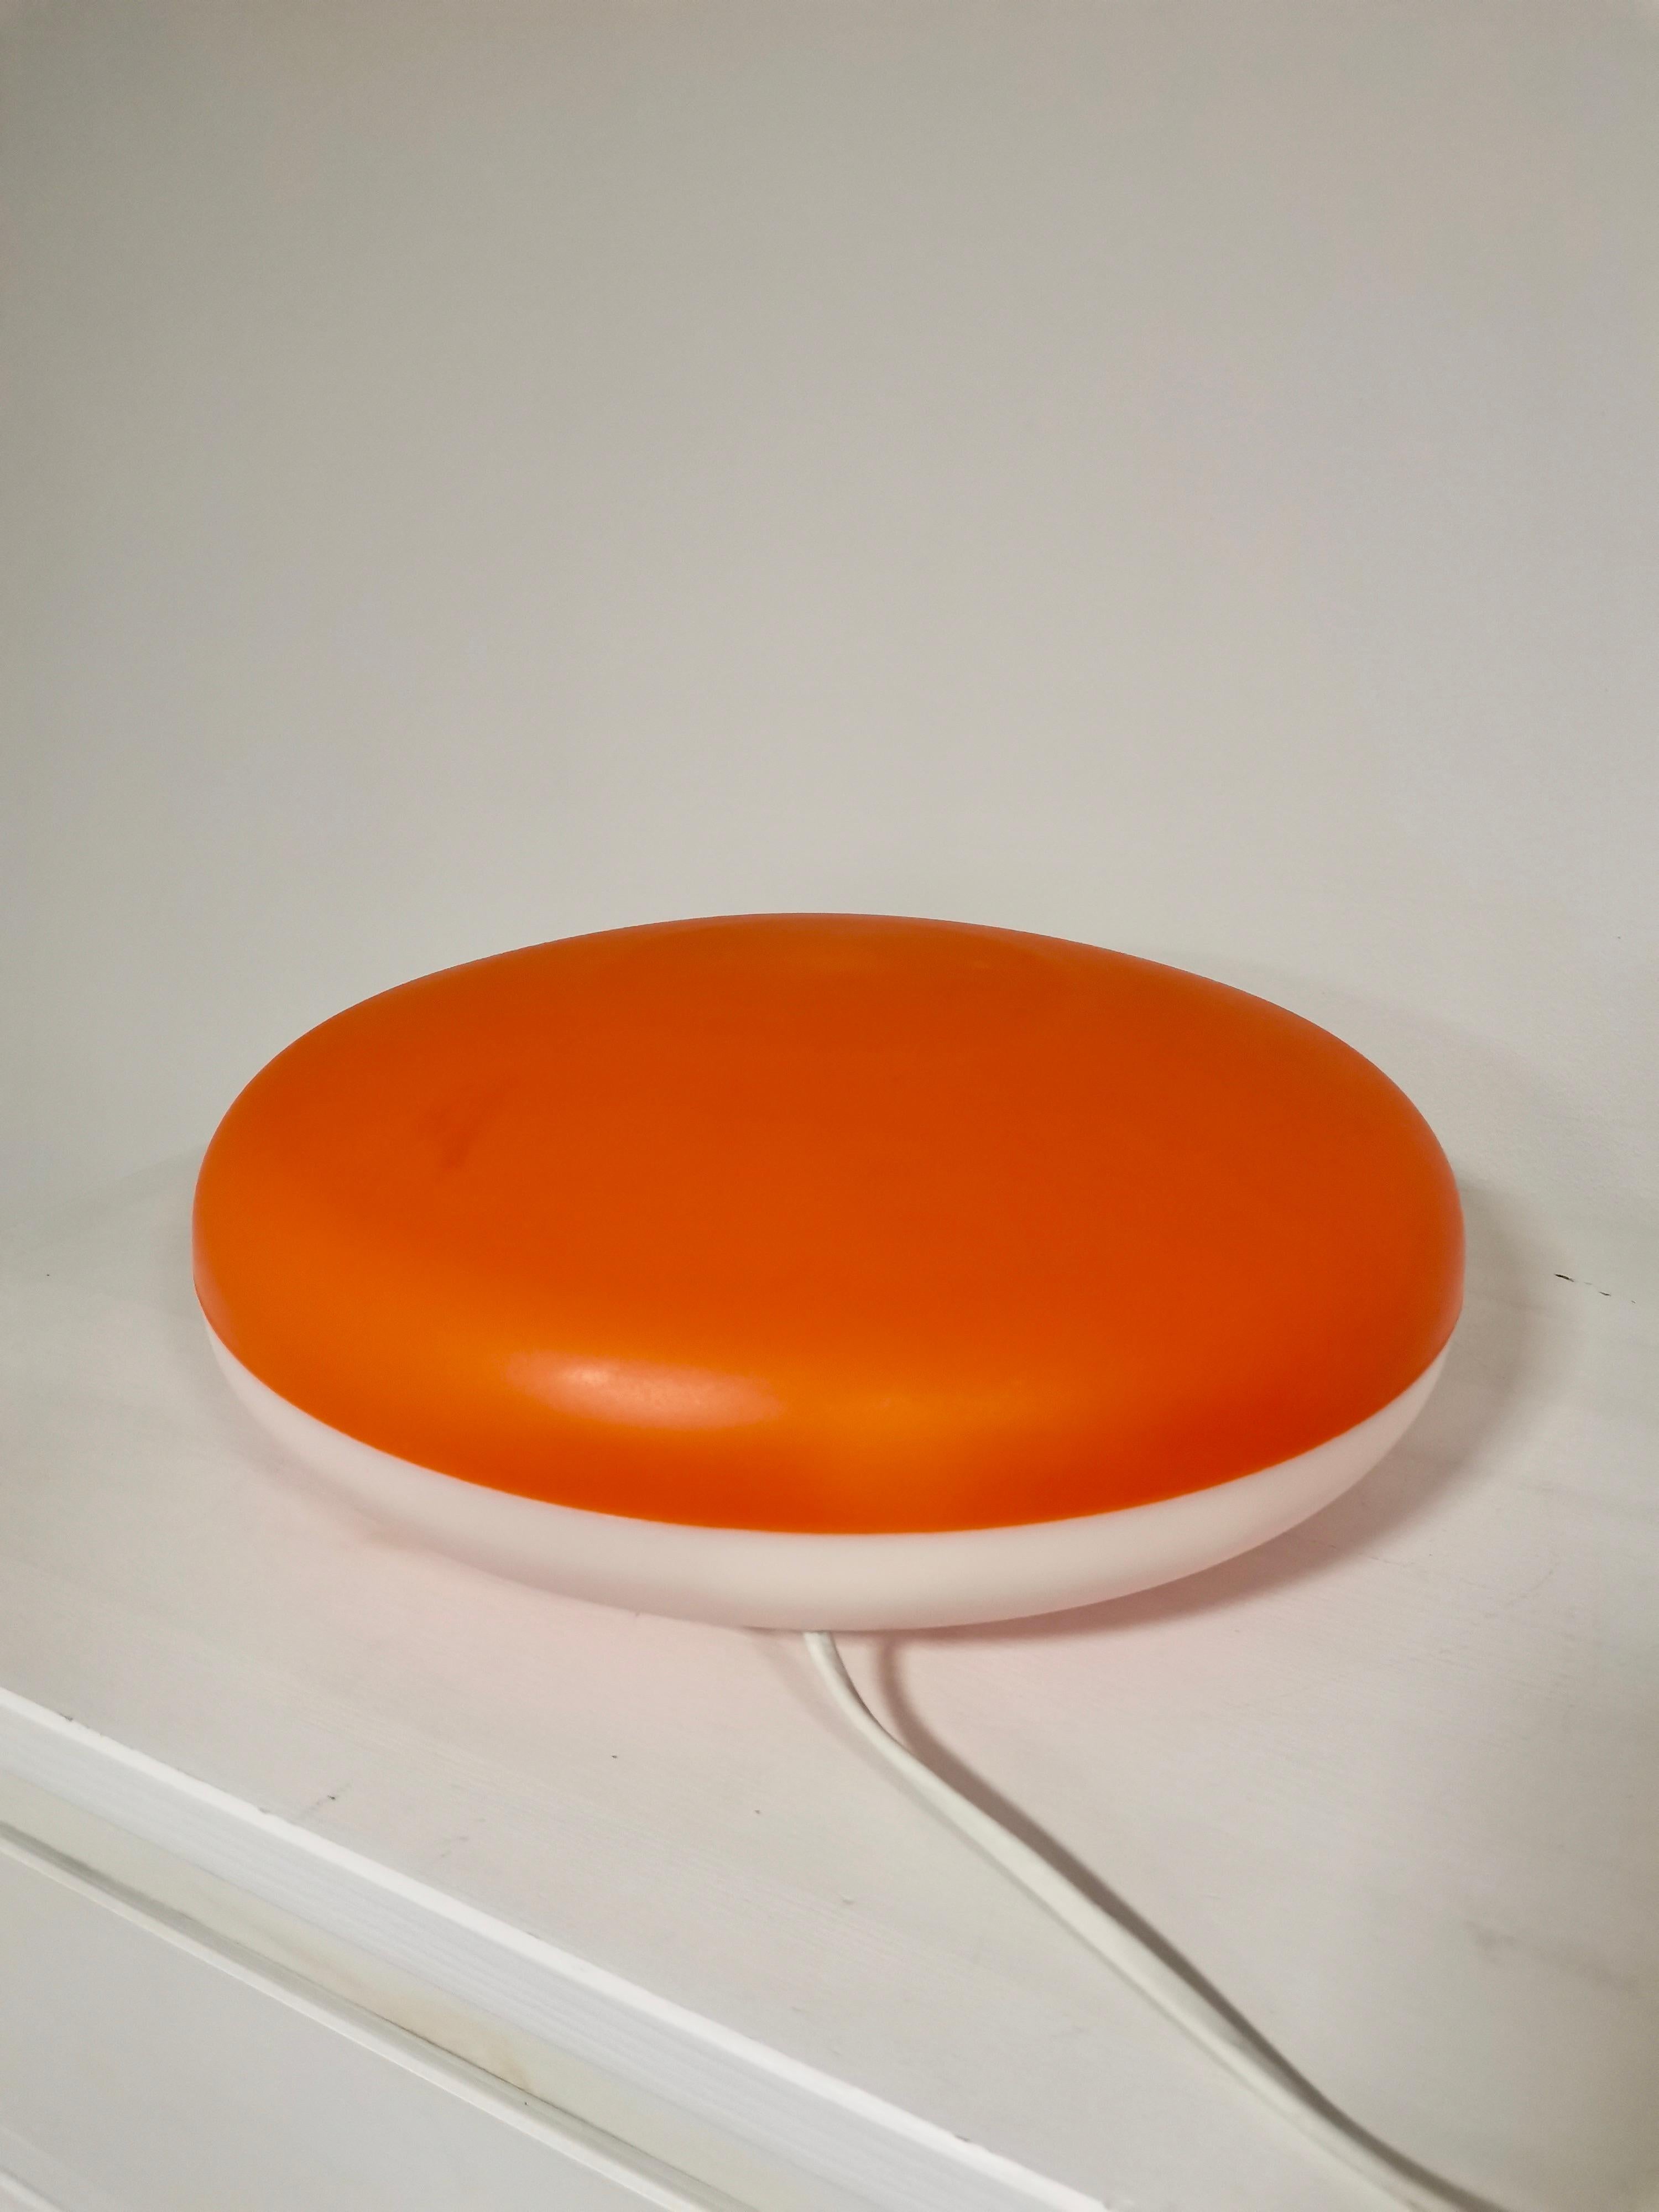 Lamp by producer Cosi Come Designed by Protocol Paris 1975-2000. Beautiful round lamp, orange at the top and white at the bottom. Can be used as a table lamp or wall lamp. With on and off button on the cable. With its warm light creates sensation of